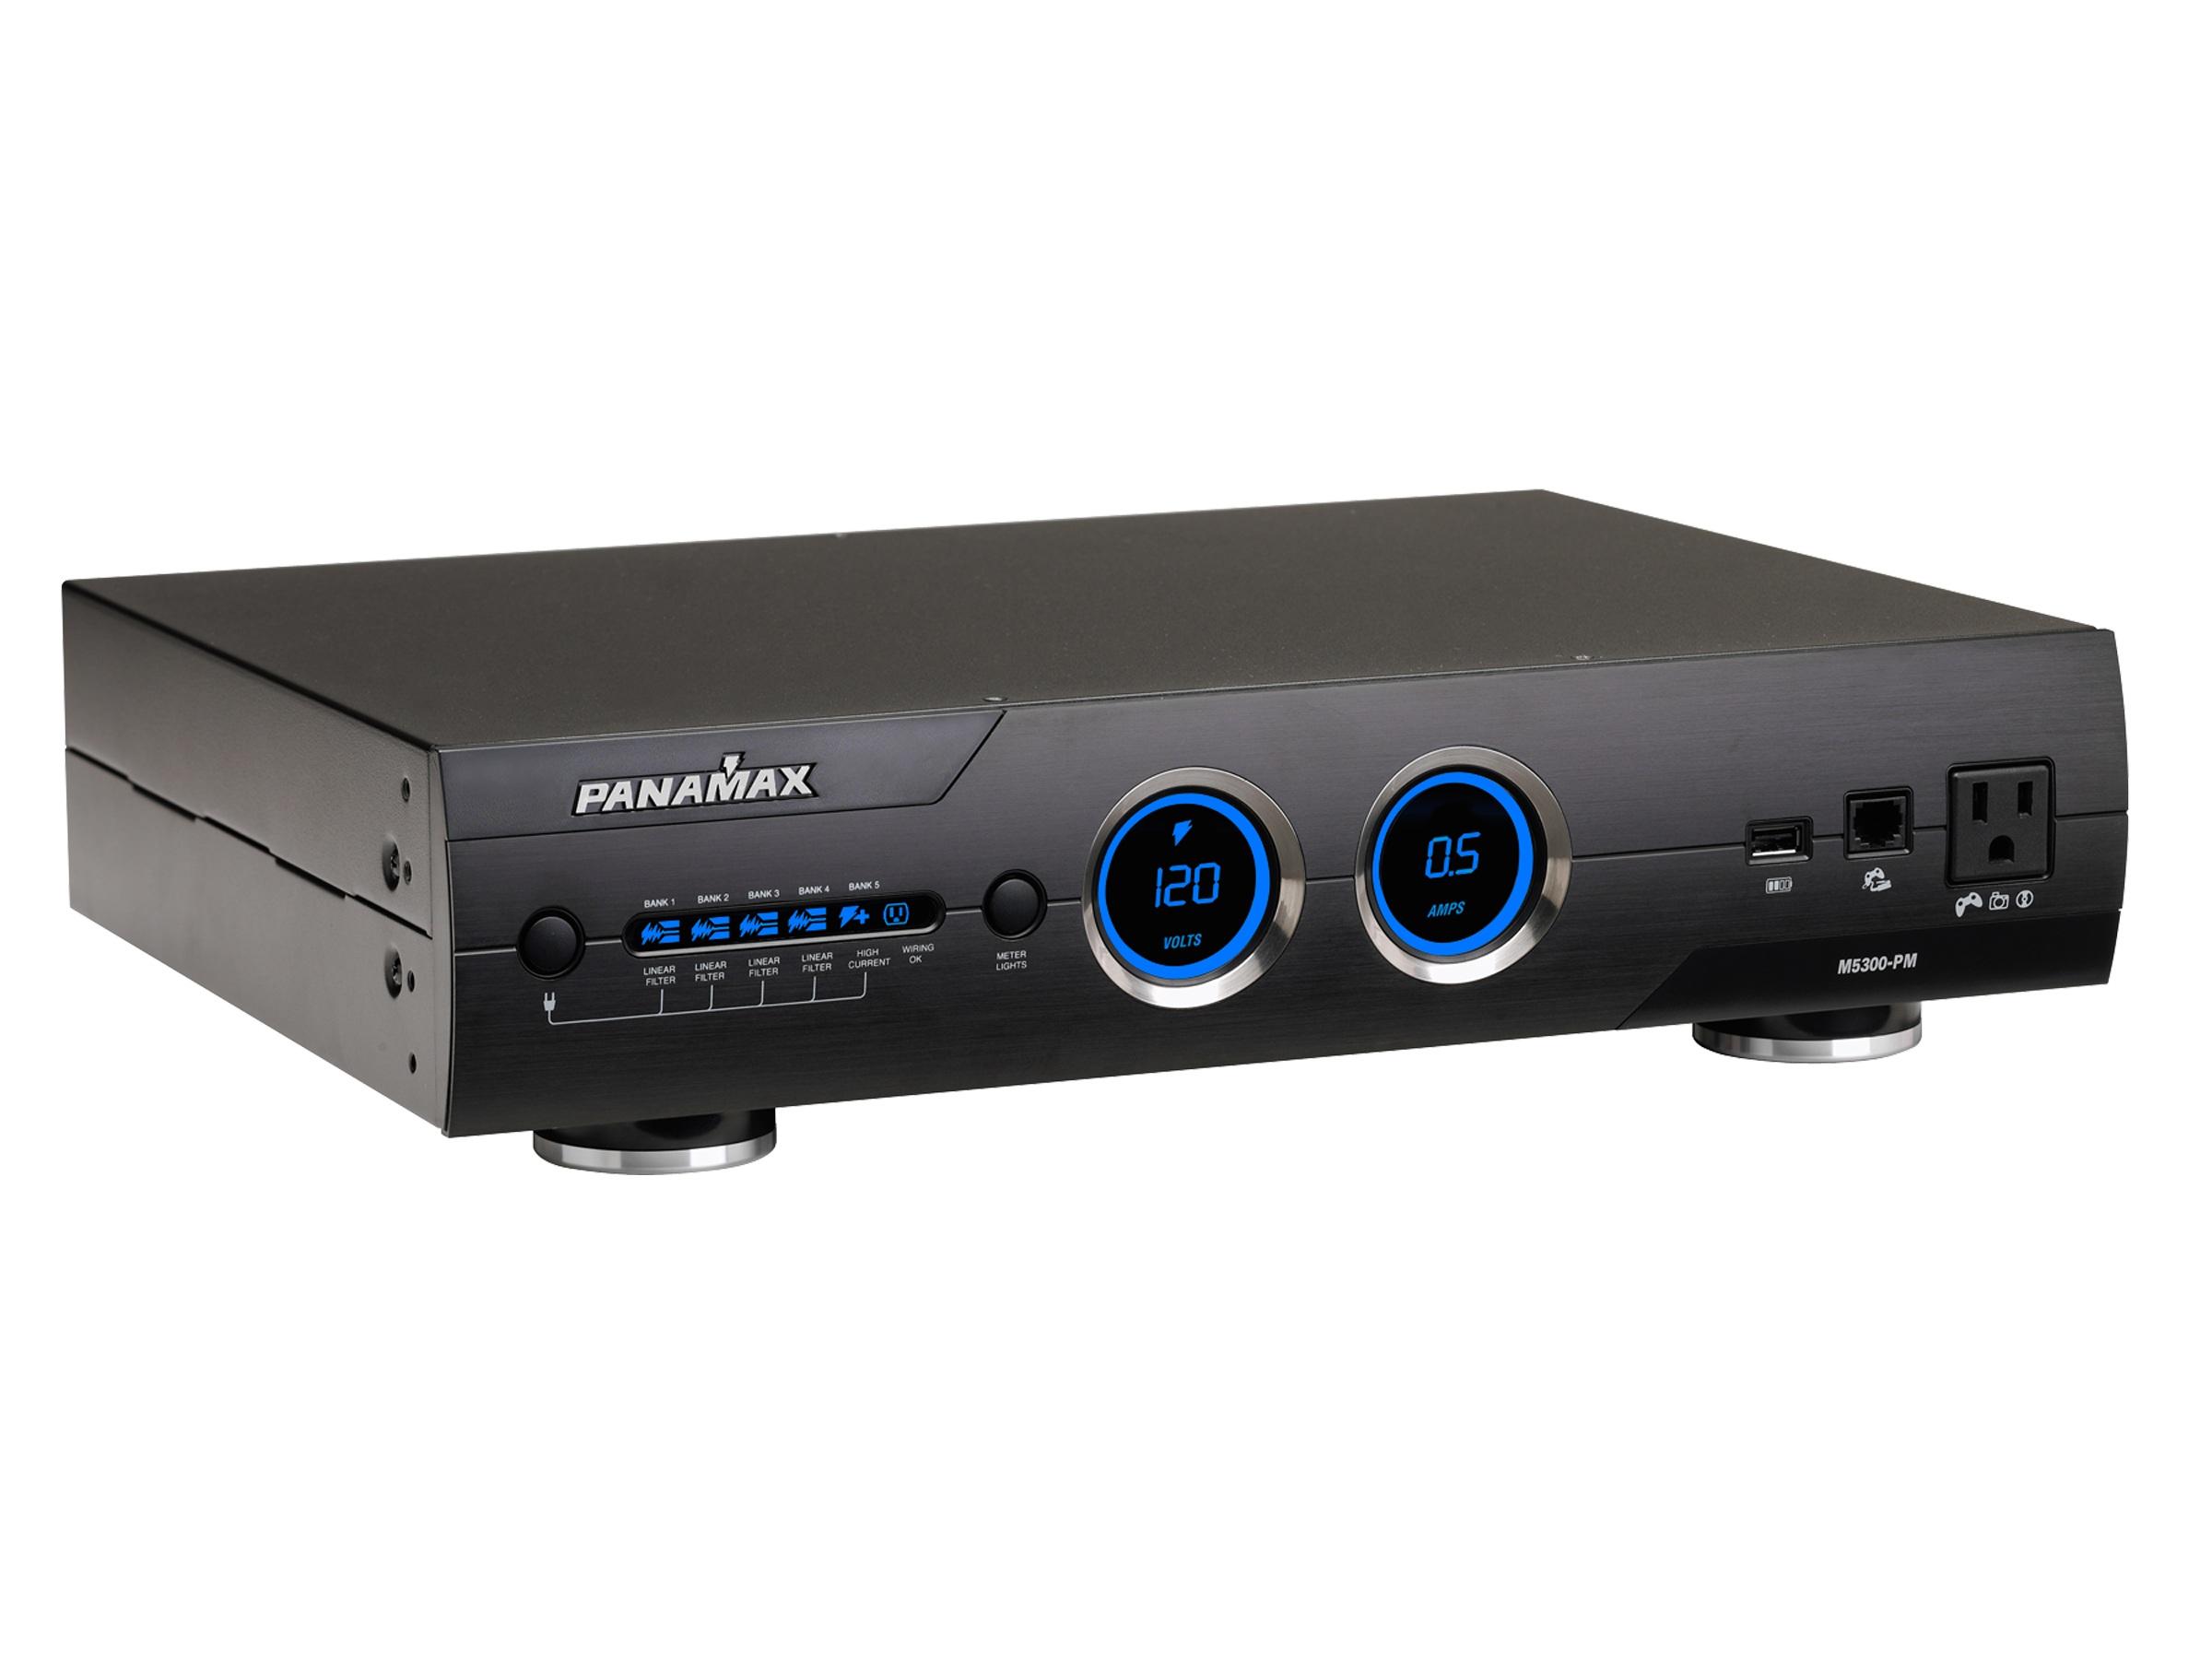 M5300-PM Max 5300 Power Conditioners/2RU/11 Outlets by Panamax